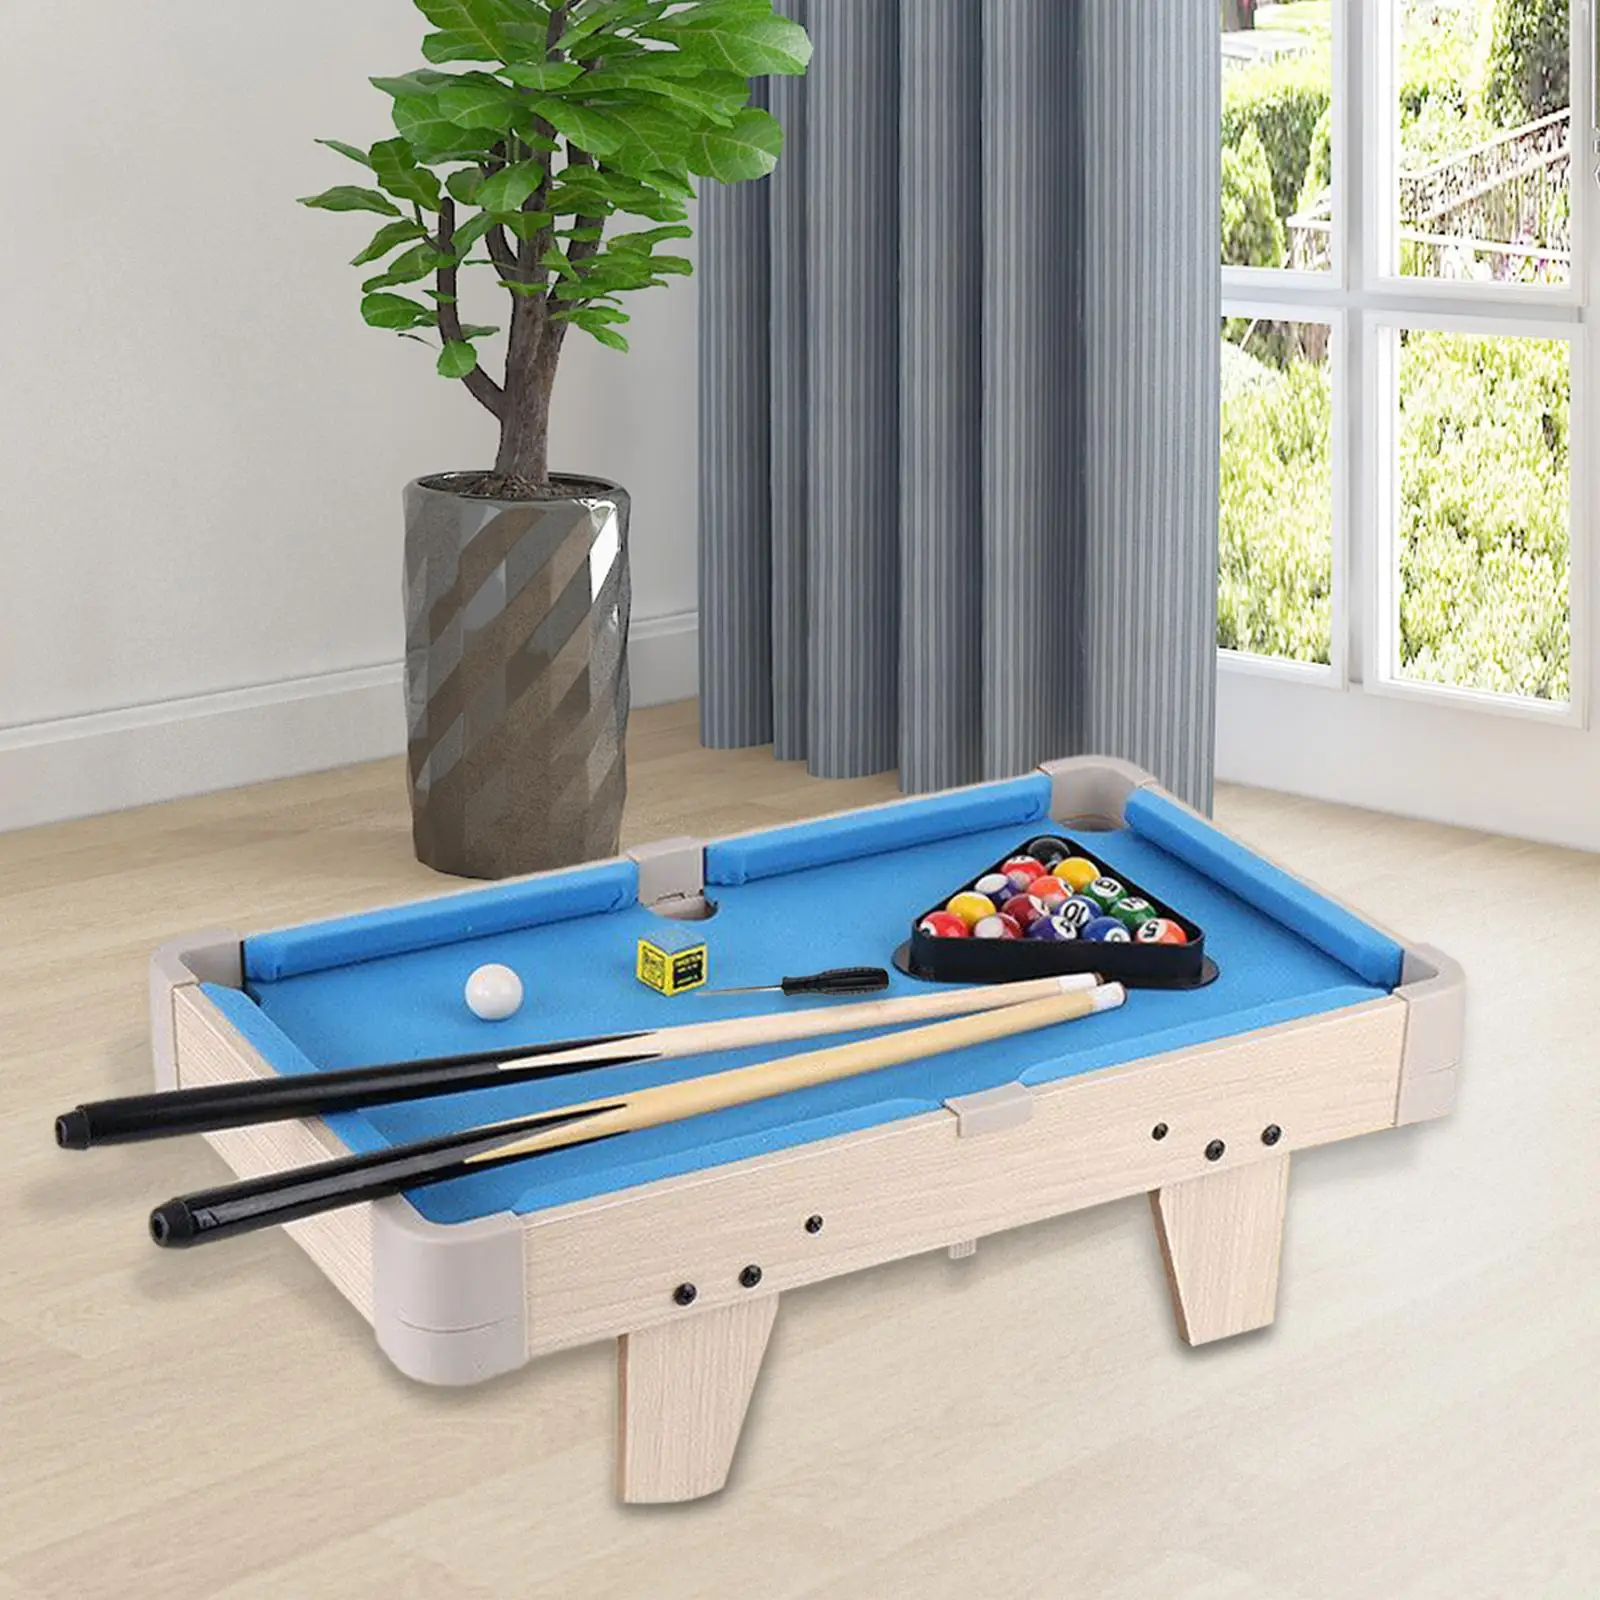 Pool Table Set with 15 Colorful Balls, 1 Cue Ball for Children Boys Girls